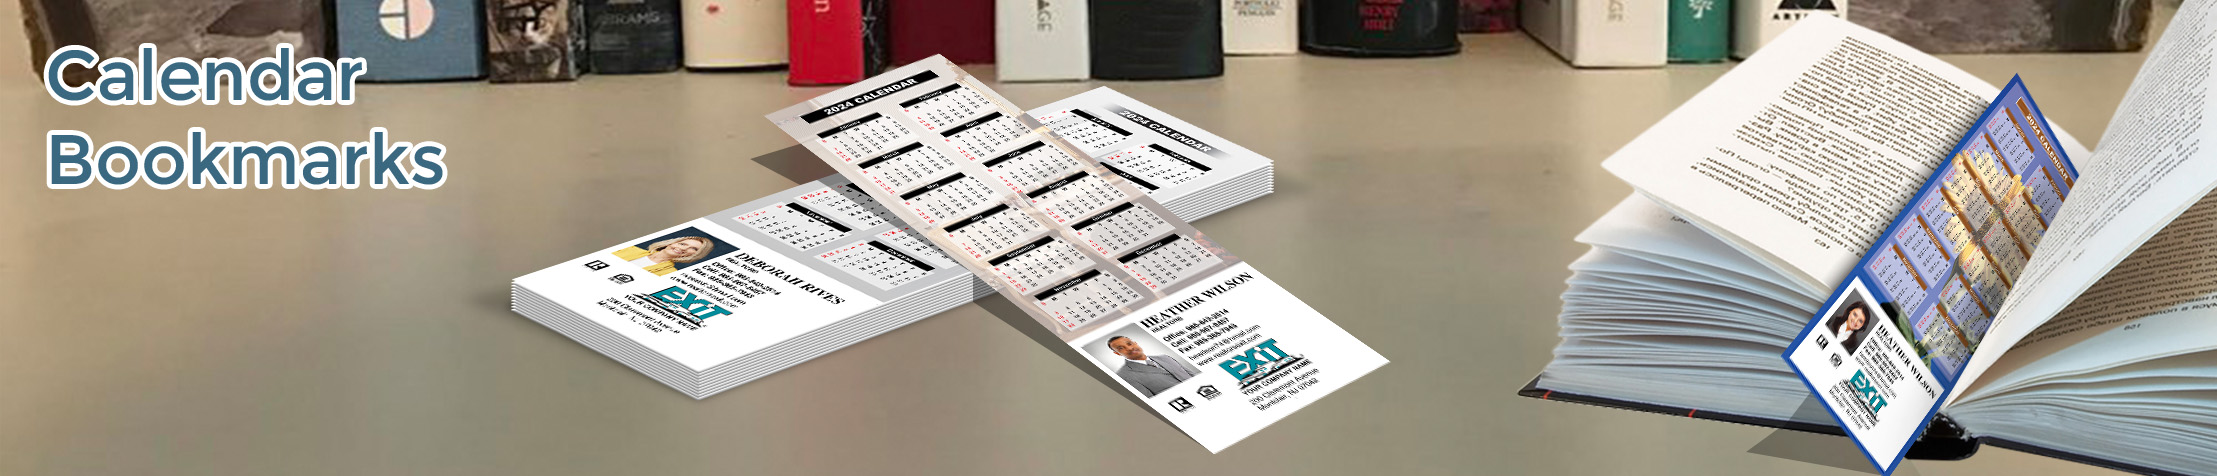 Exit Realty  Calendar Bookmarks - Exit Realty approved vendor 2019 calendars printed on book markers | BestPrintBuy.com